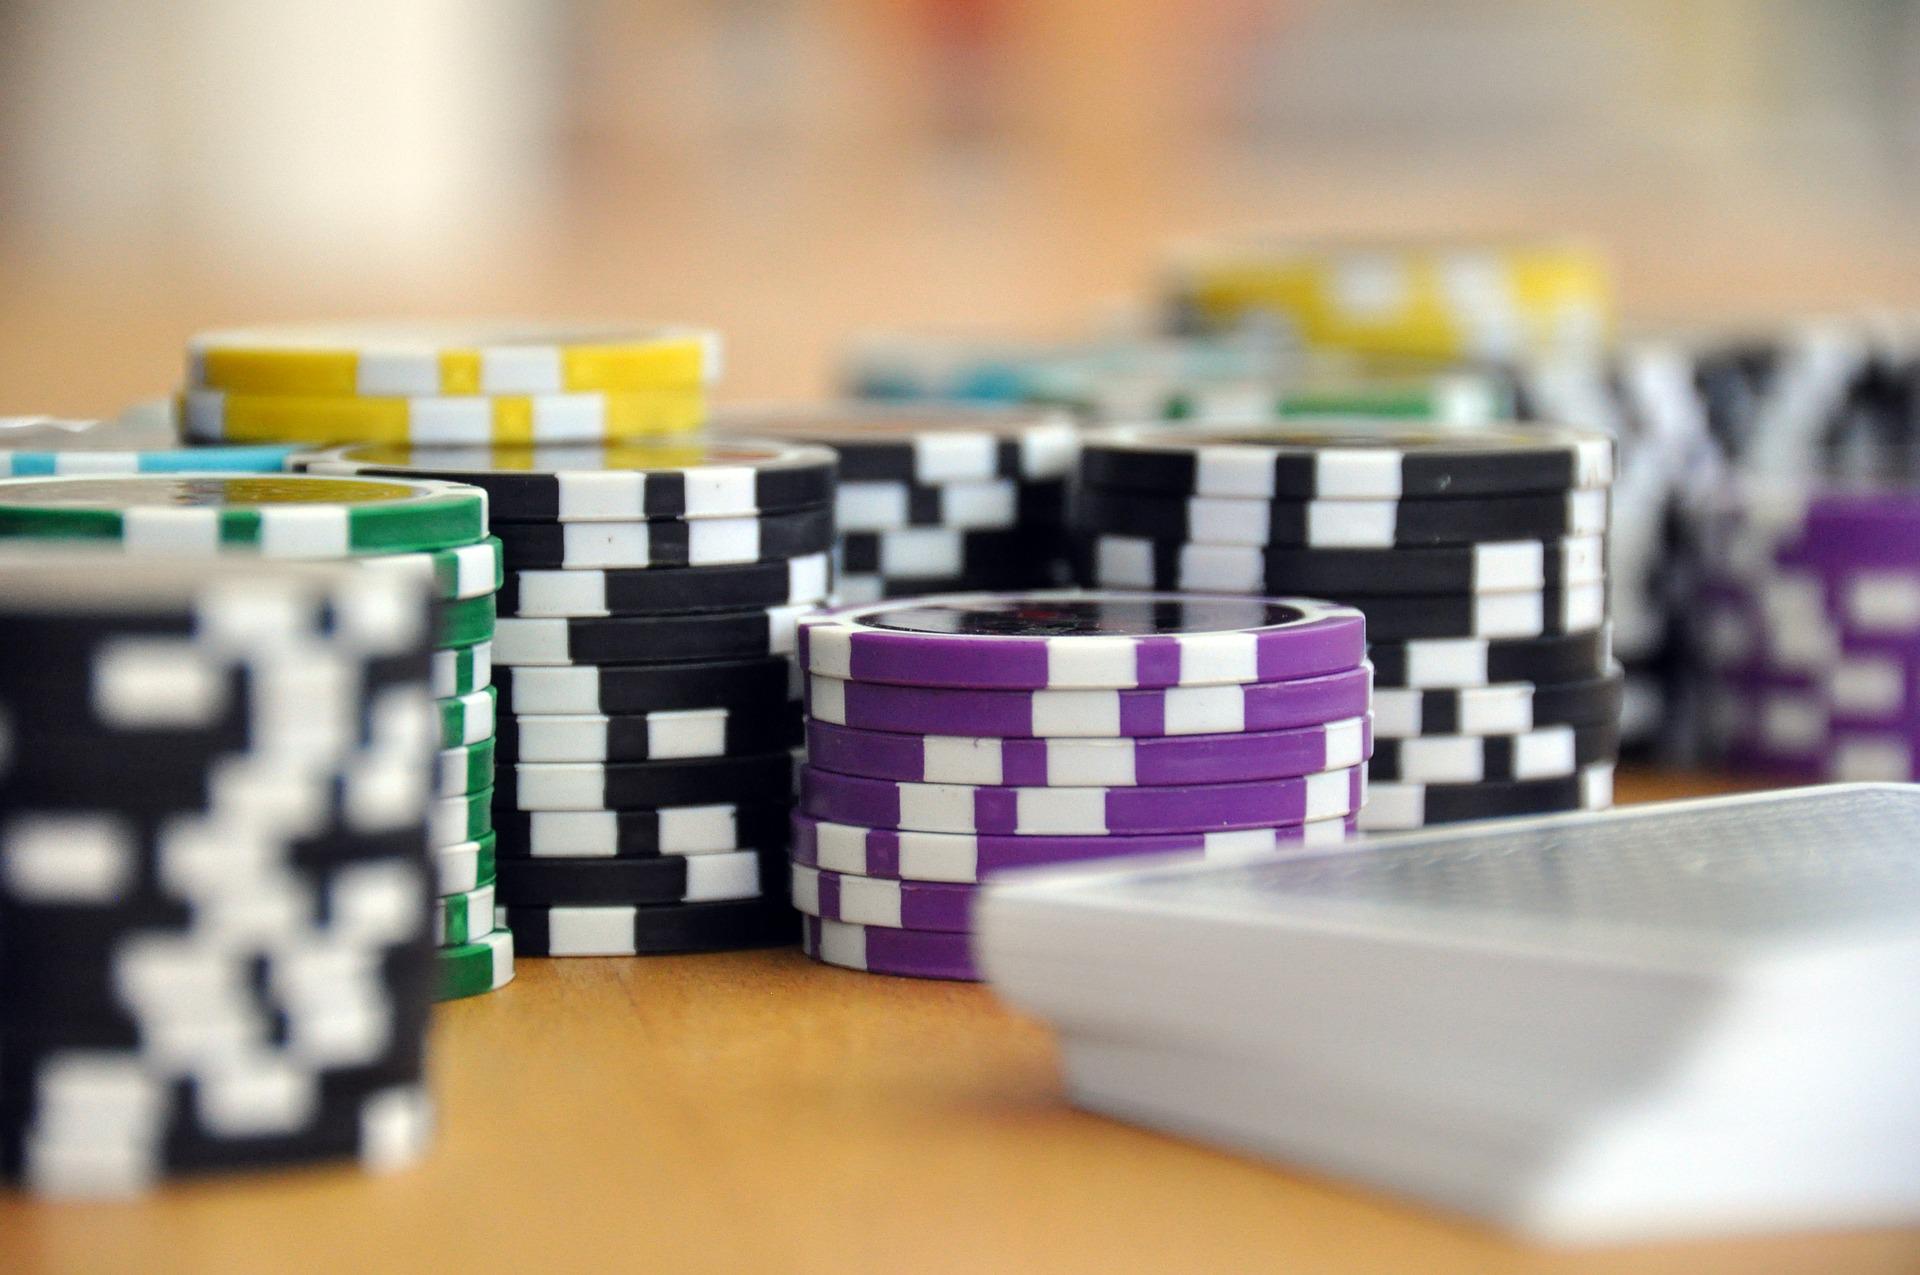 chips next to deck of cards in article about online casino